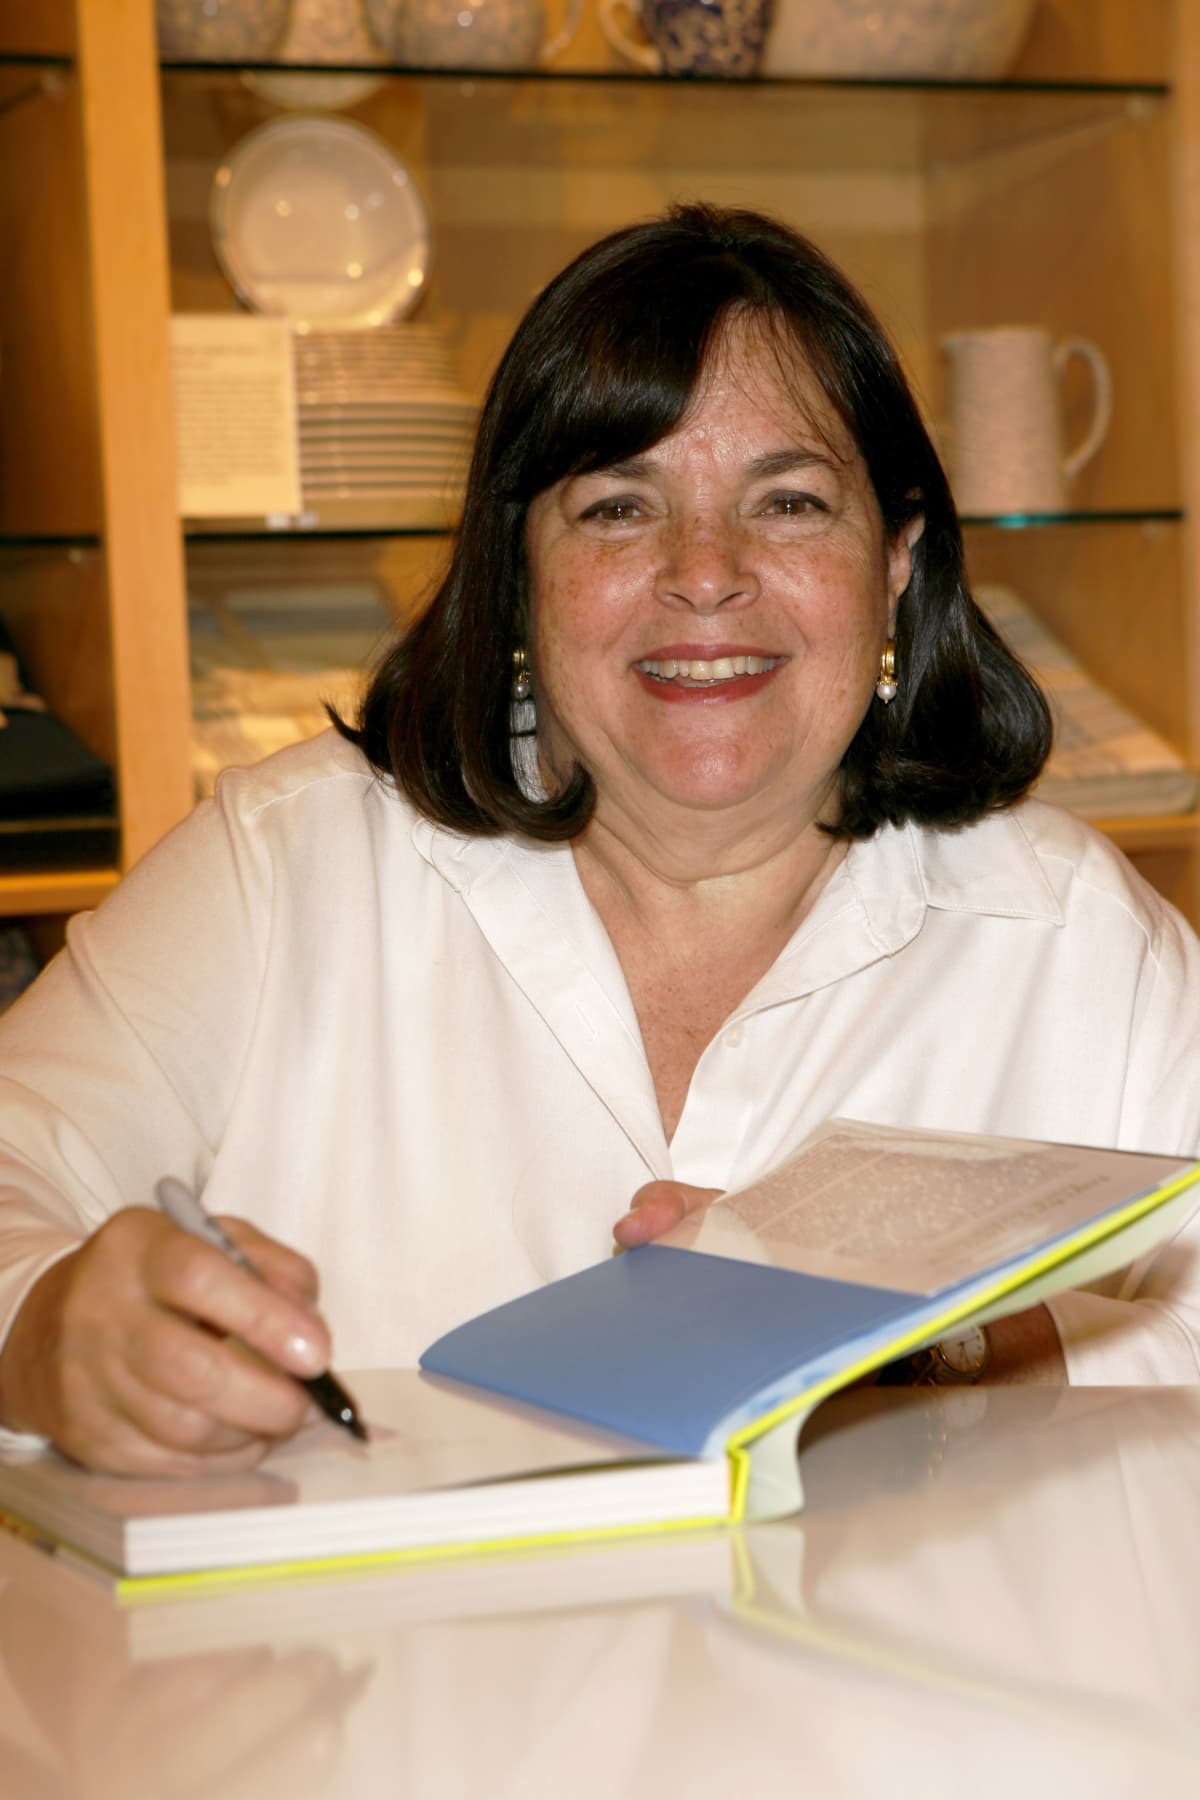 Ina Garten smiling and signing a book with her autograph